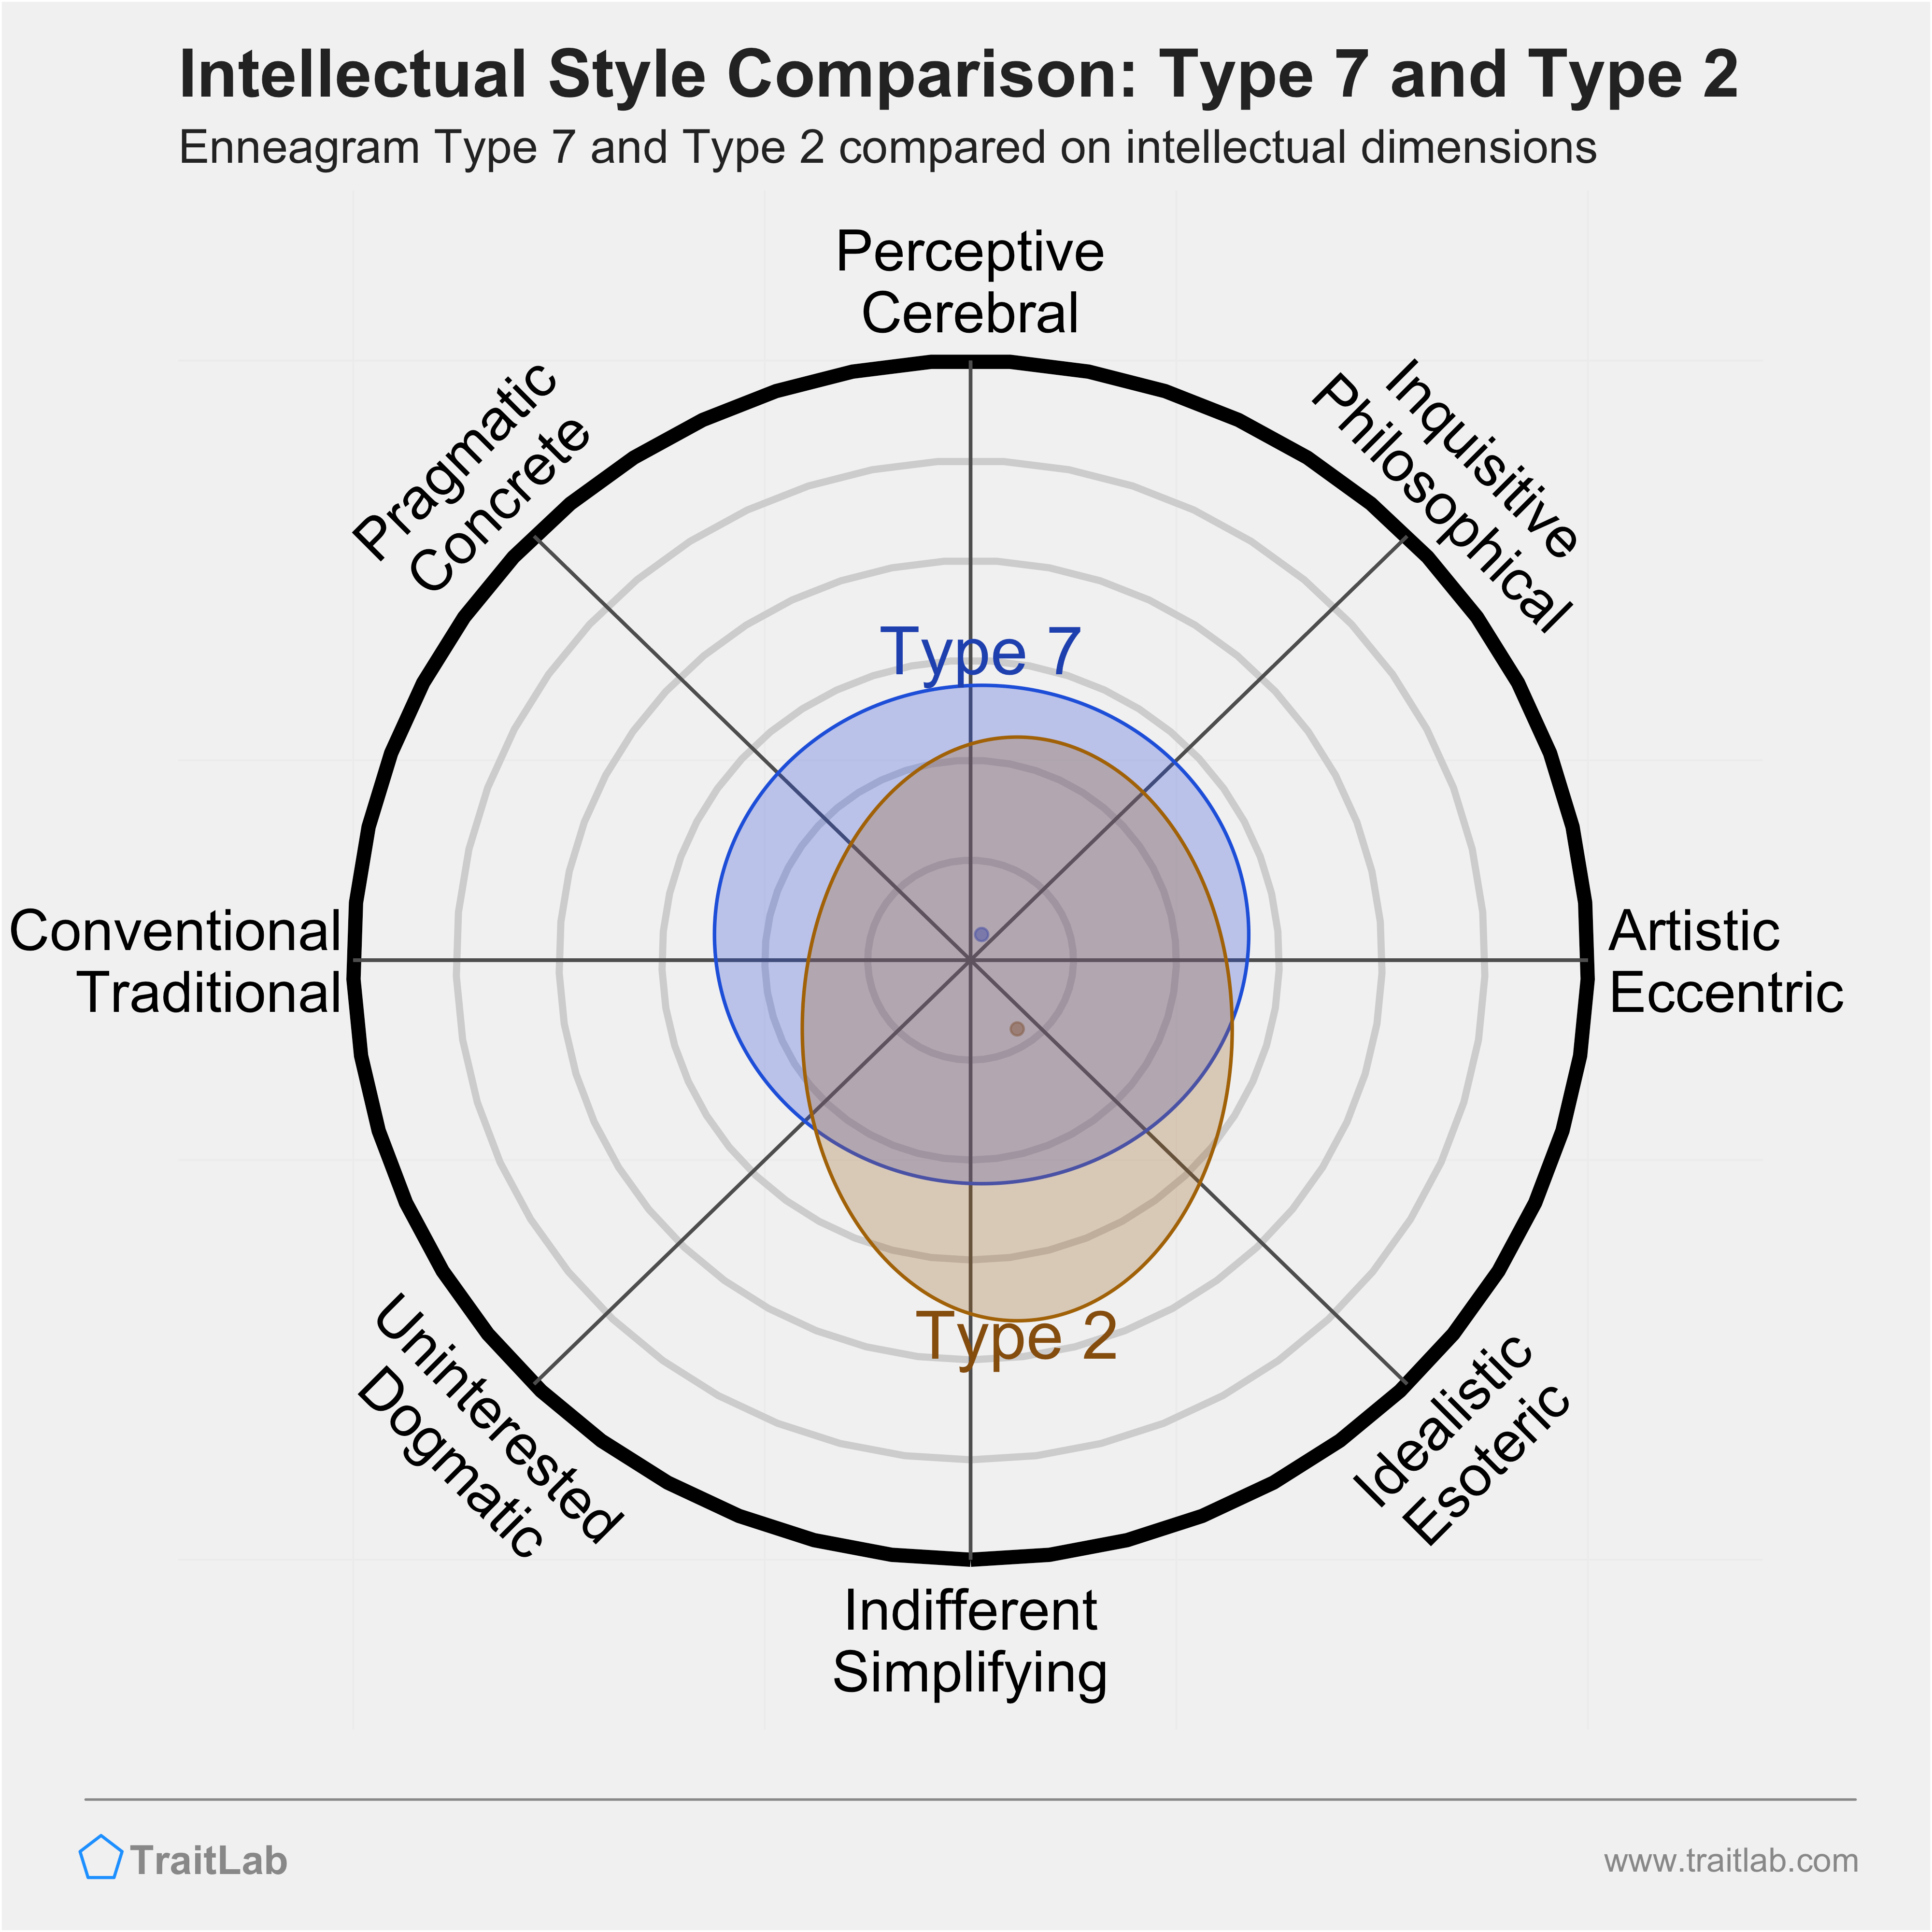 Type 7 and Type 2 comparison across intellectual dimensions